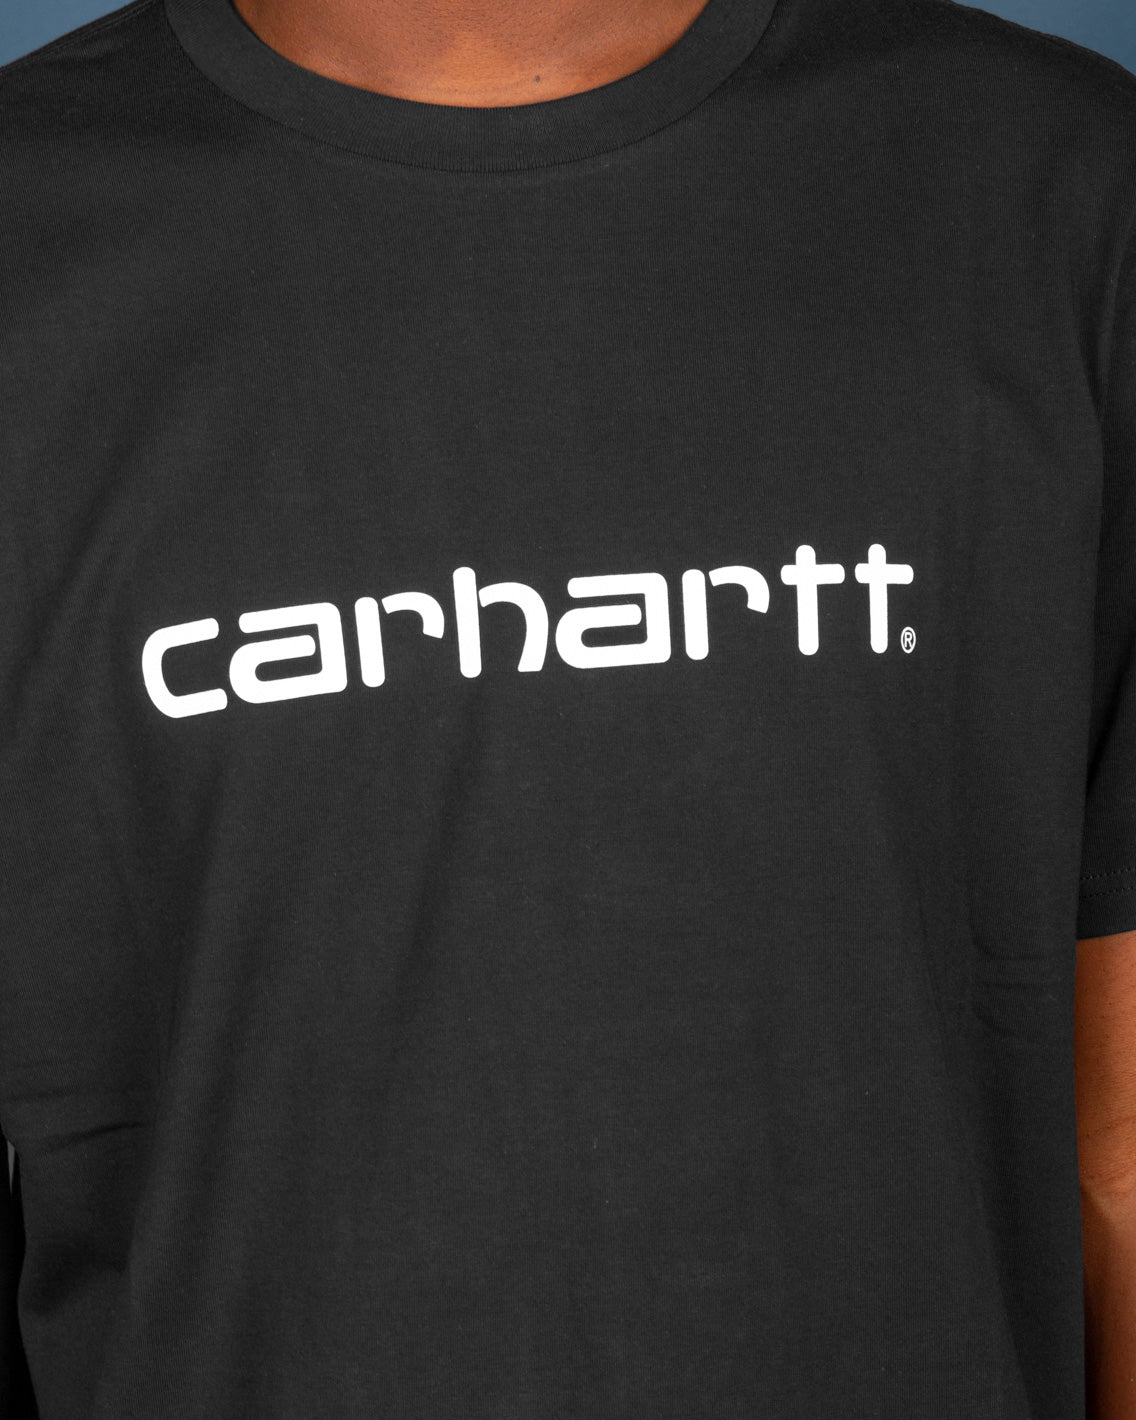 The Carhartt Script T-Shirt in Black features the iconic Carhartt logo printed on the front in white. Coming in a regular fit and featuring a comfortable ribbed neckline, this short-sleeve t-shirt is a perfect layering piece in your streetwear wardrobe.